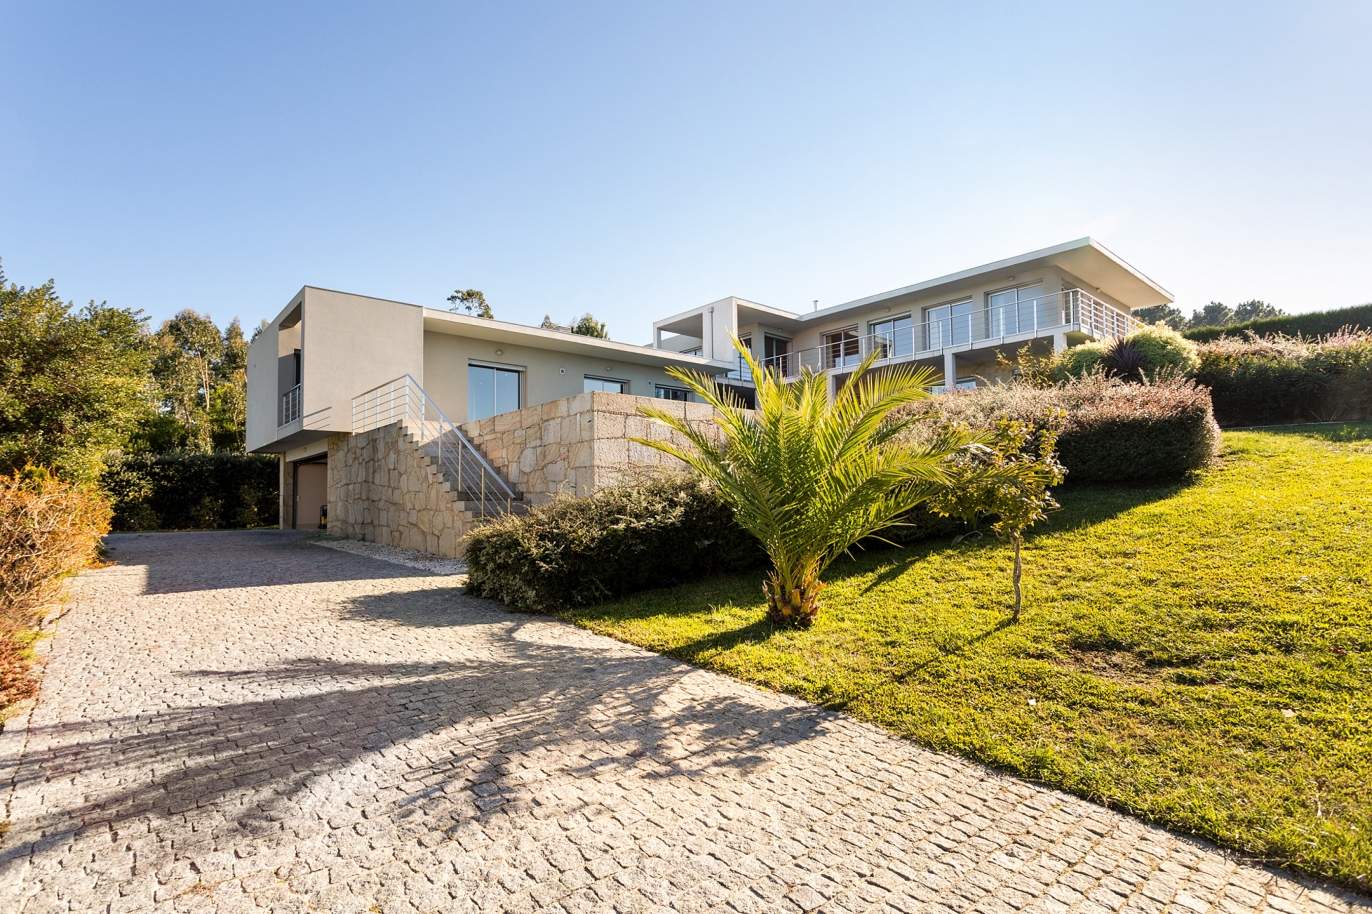 Villa for sale with panoramic views of the sea and the Minho River estuary, Caminha, North Portugal_185091